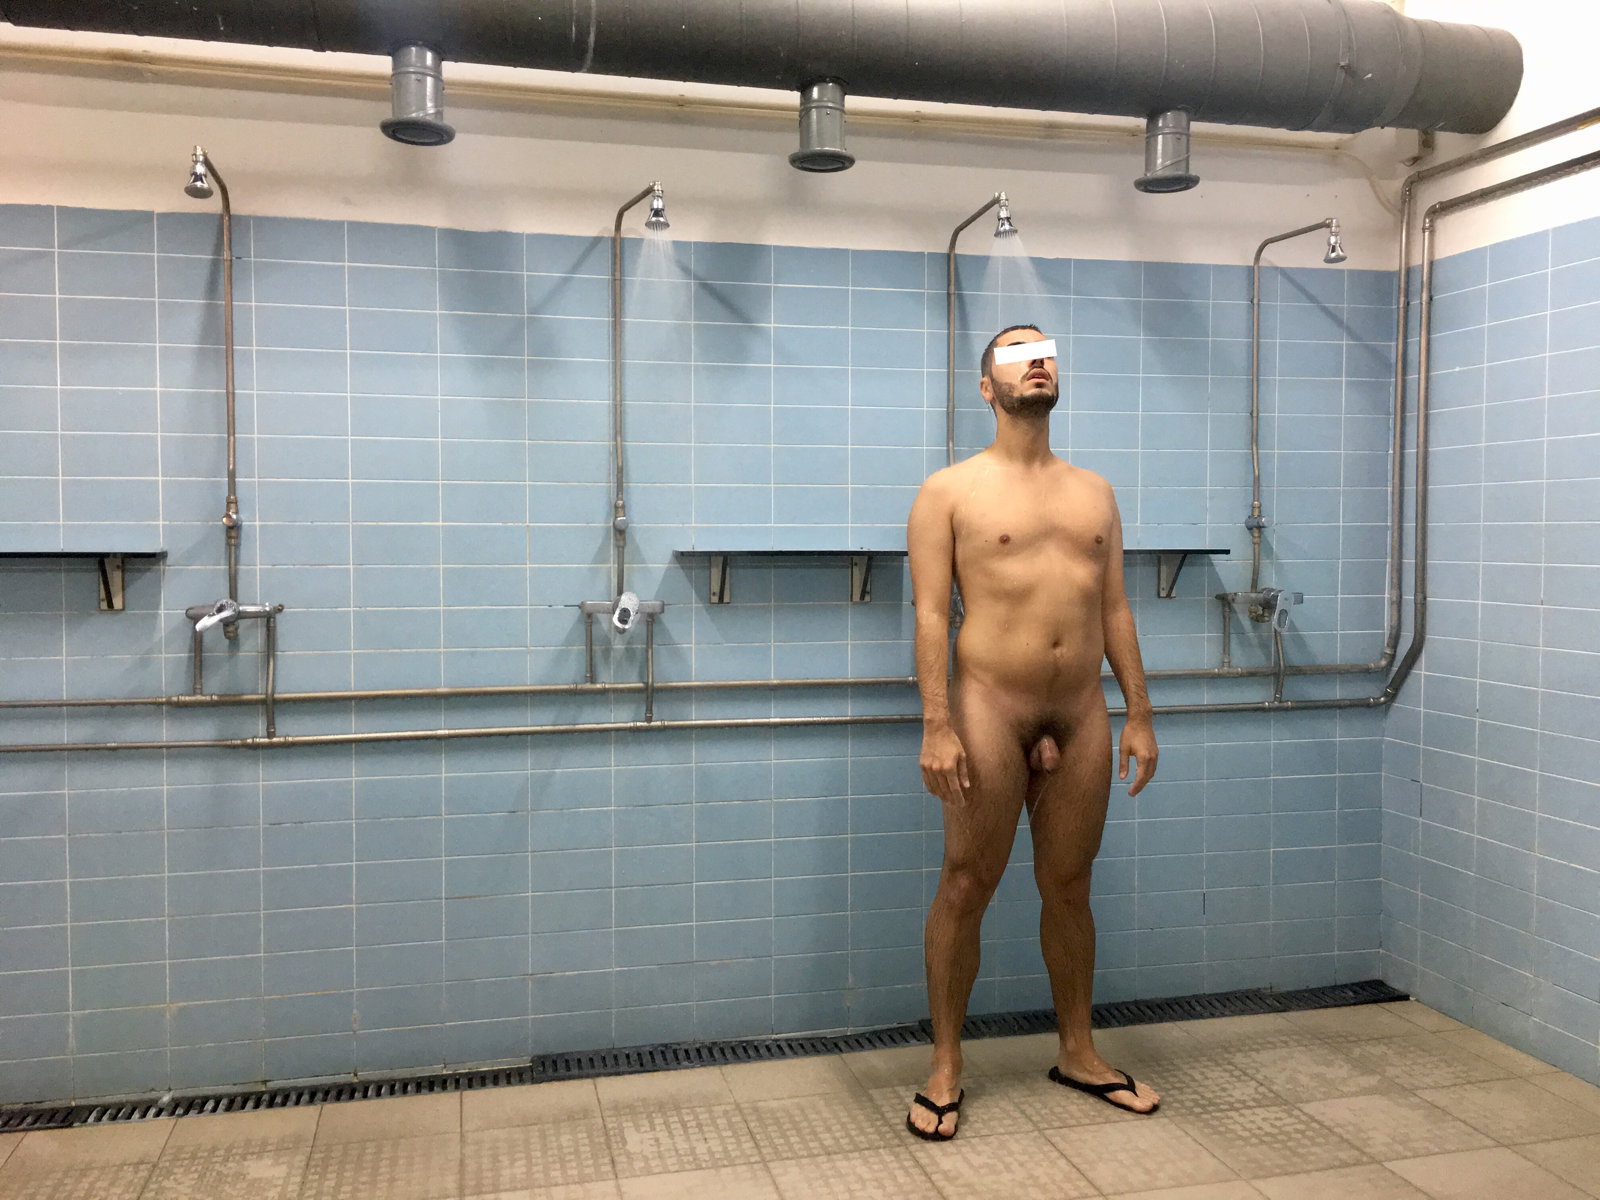 Photo by Fan in Heat with the username @faninheat, who is a verified user, posted on April 19, 2019. The post is about the topic Gay and the text says 'Rub, rub, rub
#gay #shower'